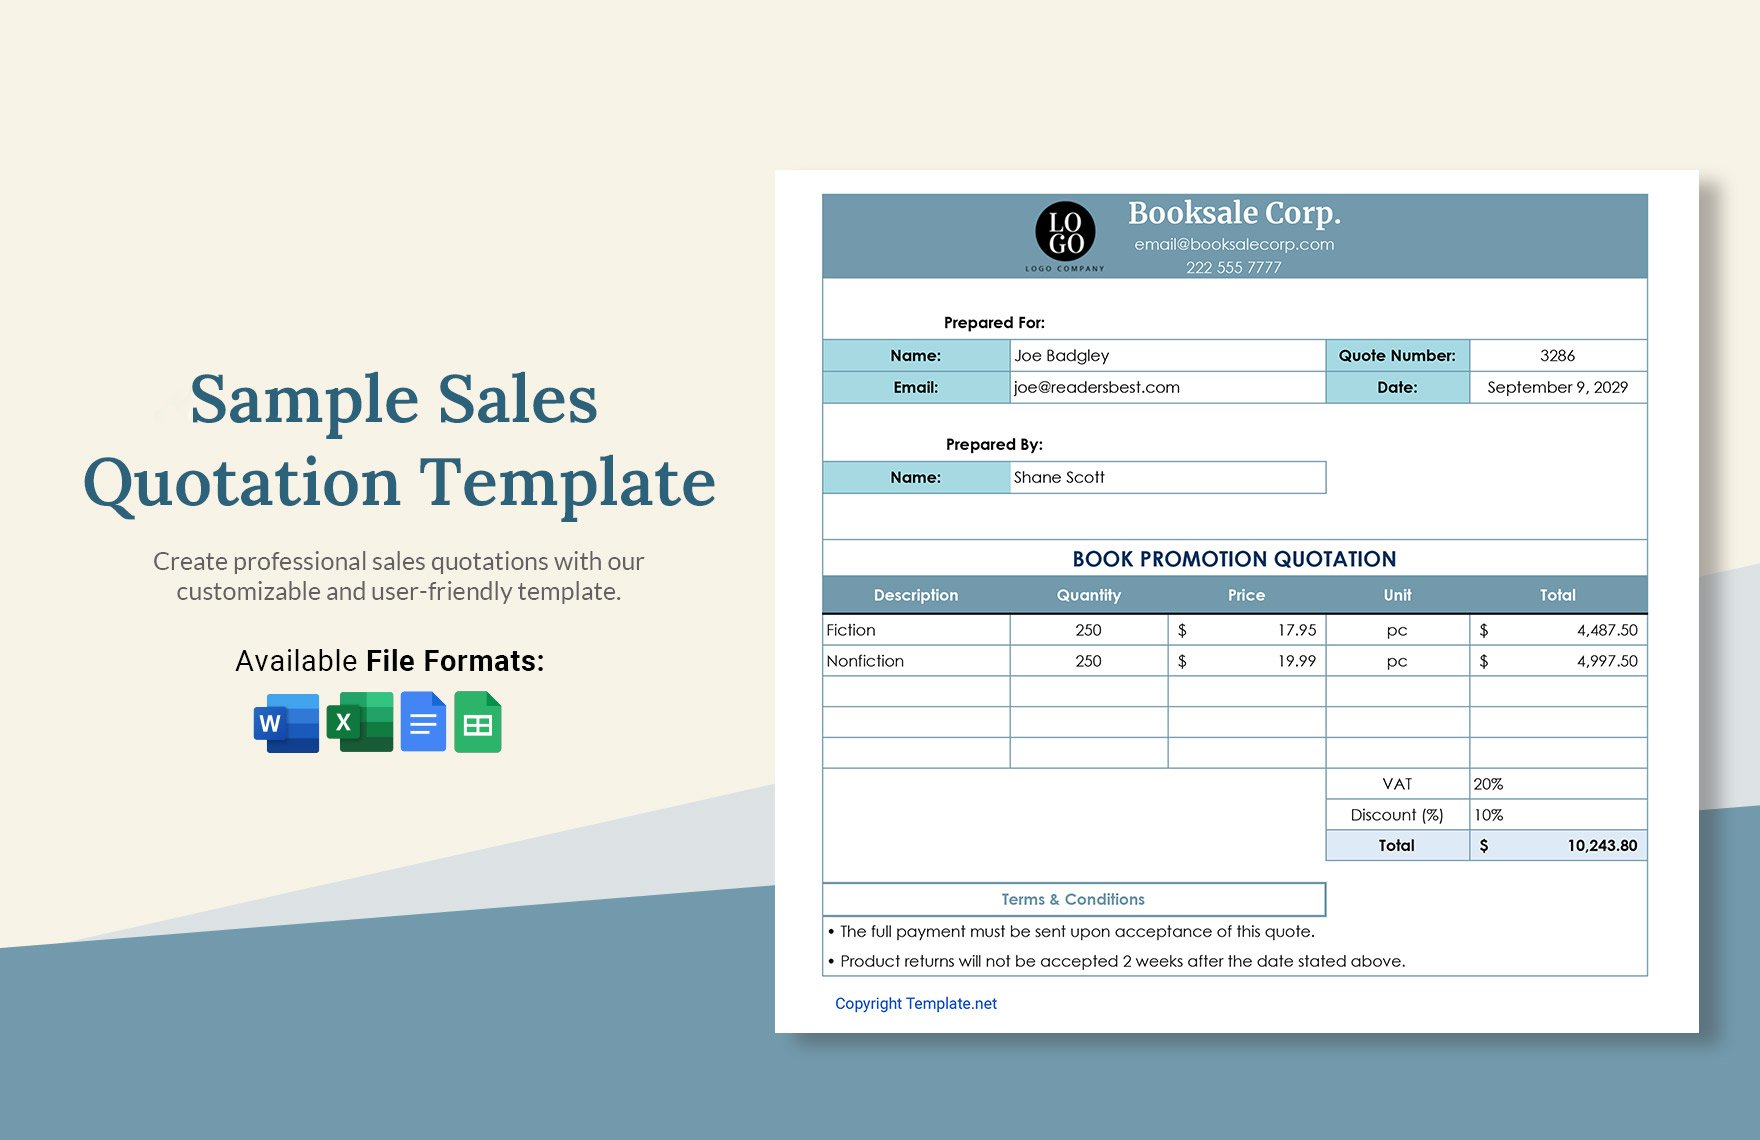 Sample Sales Quotation Template